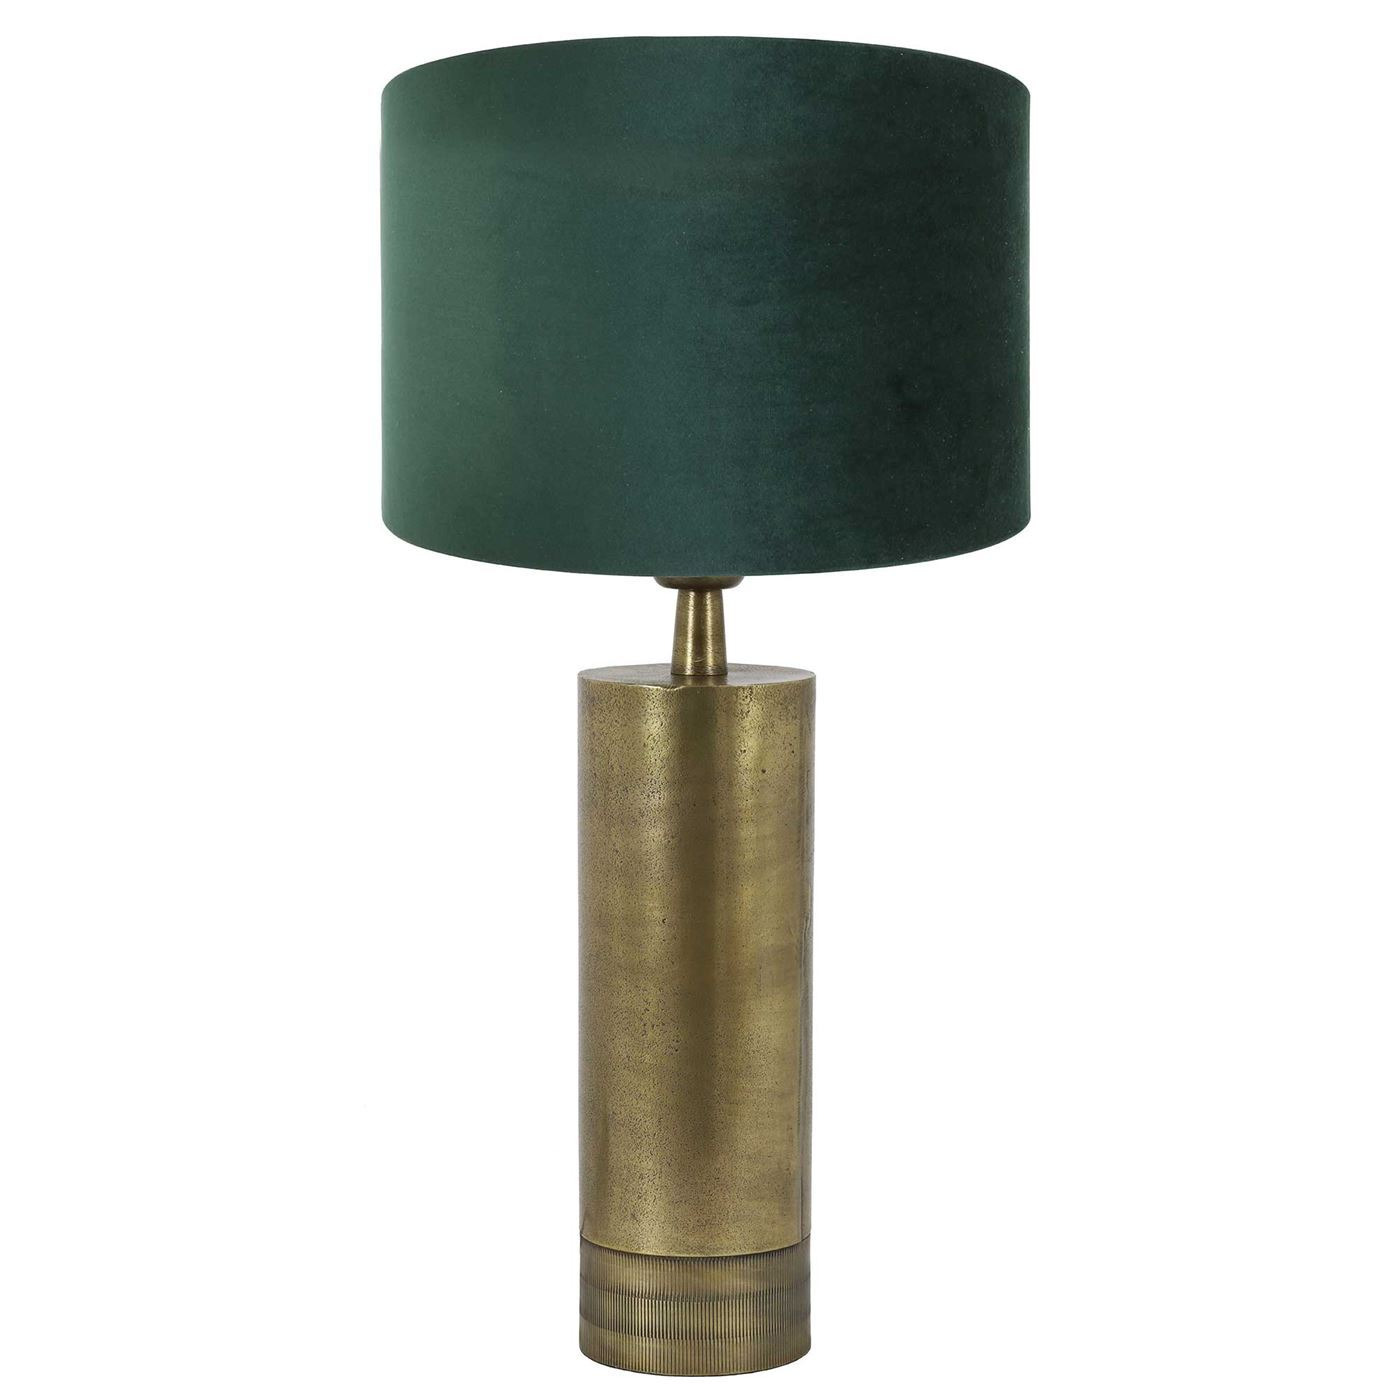 Anitique Bronze Table Lamp, Gold Metal - Barker & Stonehouse - image 1